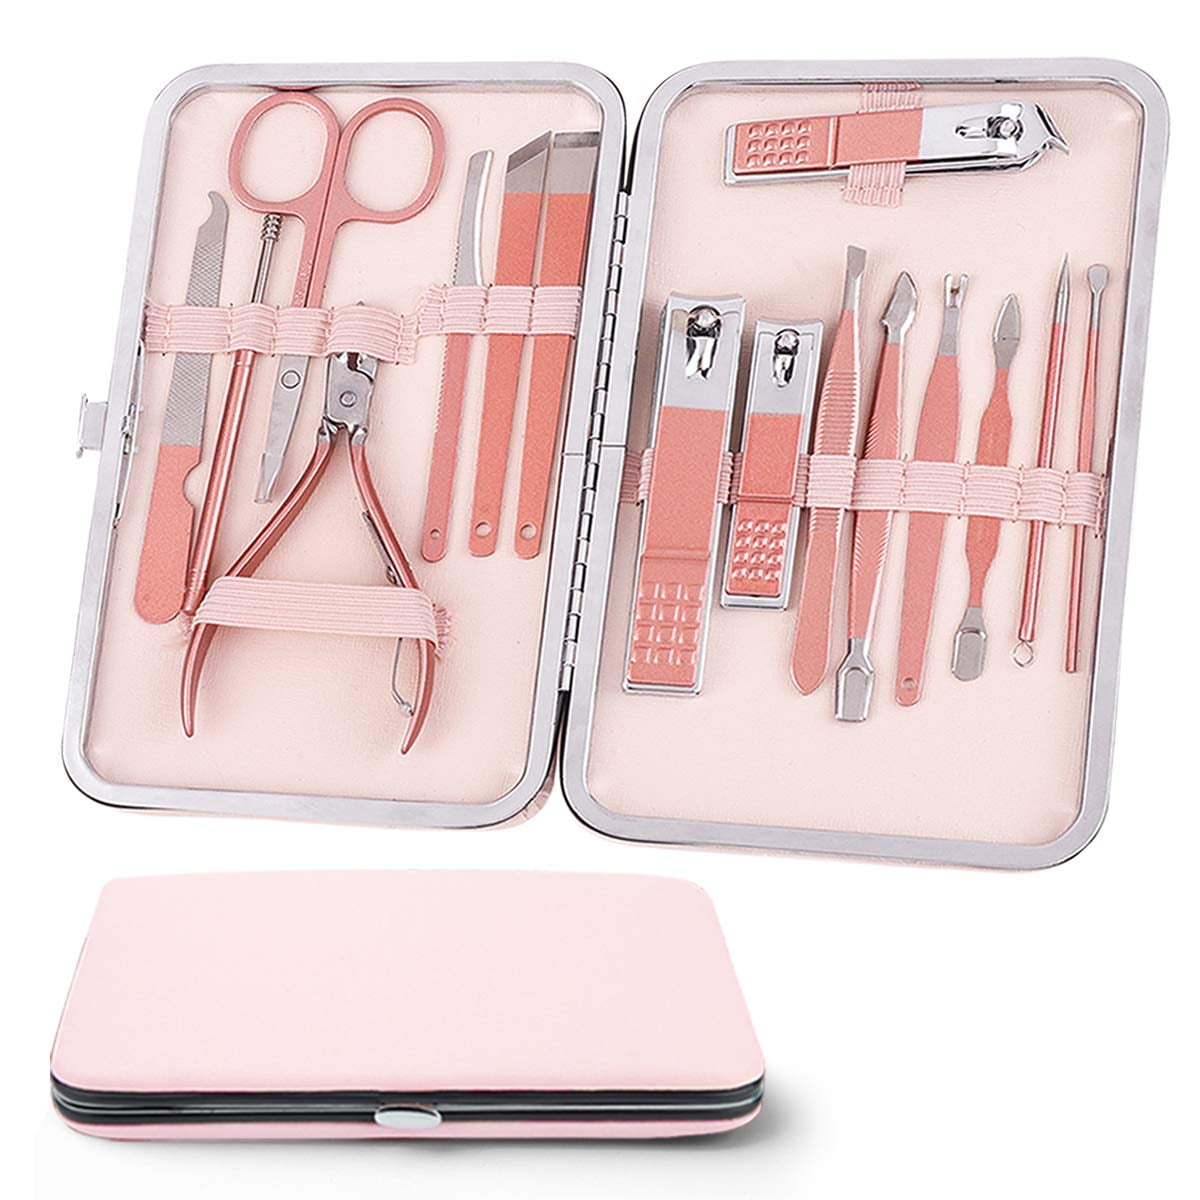 FERYES Nail Care Kit Manicure and Pedicure Set – Includes Toenail Clipper,  Nail Cutter, Nail File and Cleaner – 5 PCS Nail Trimmer Set